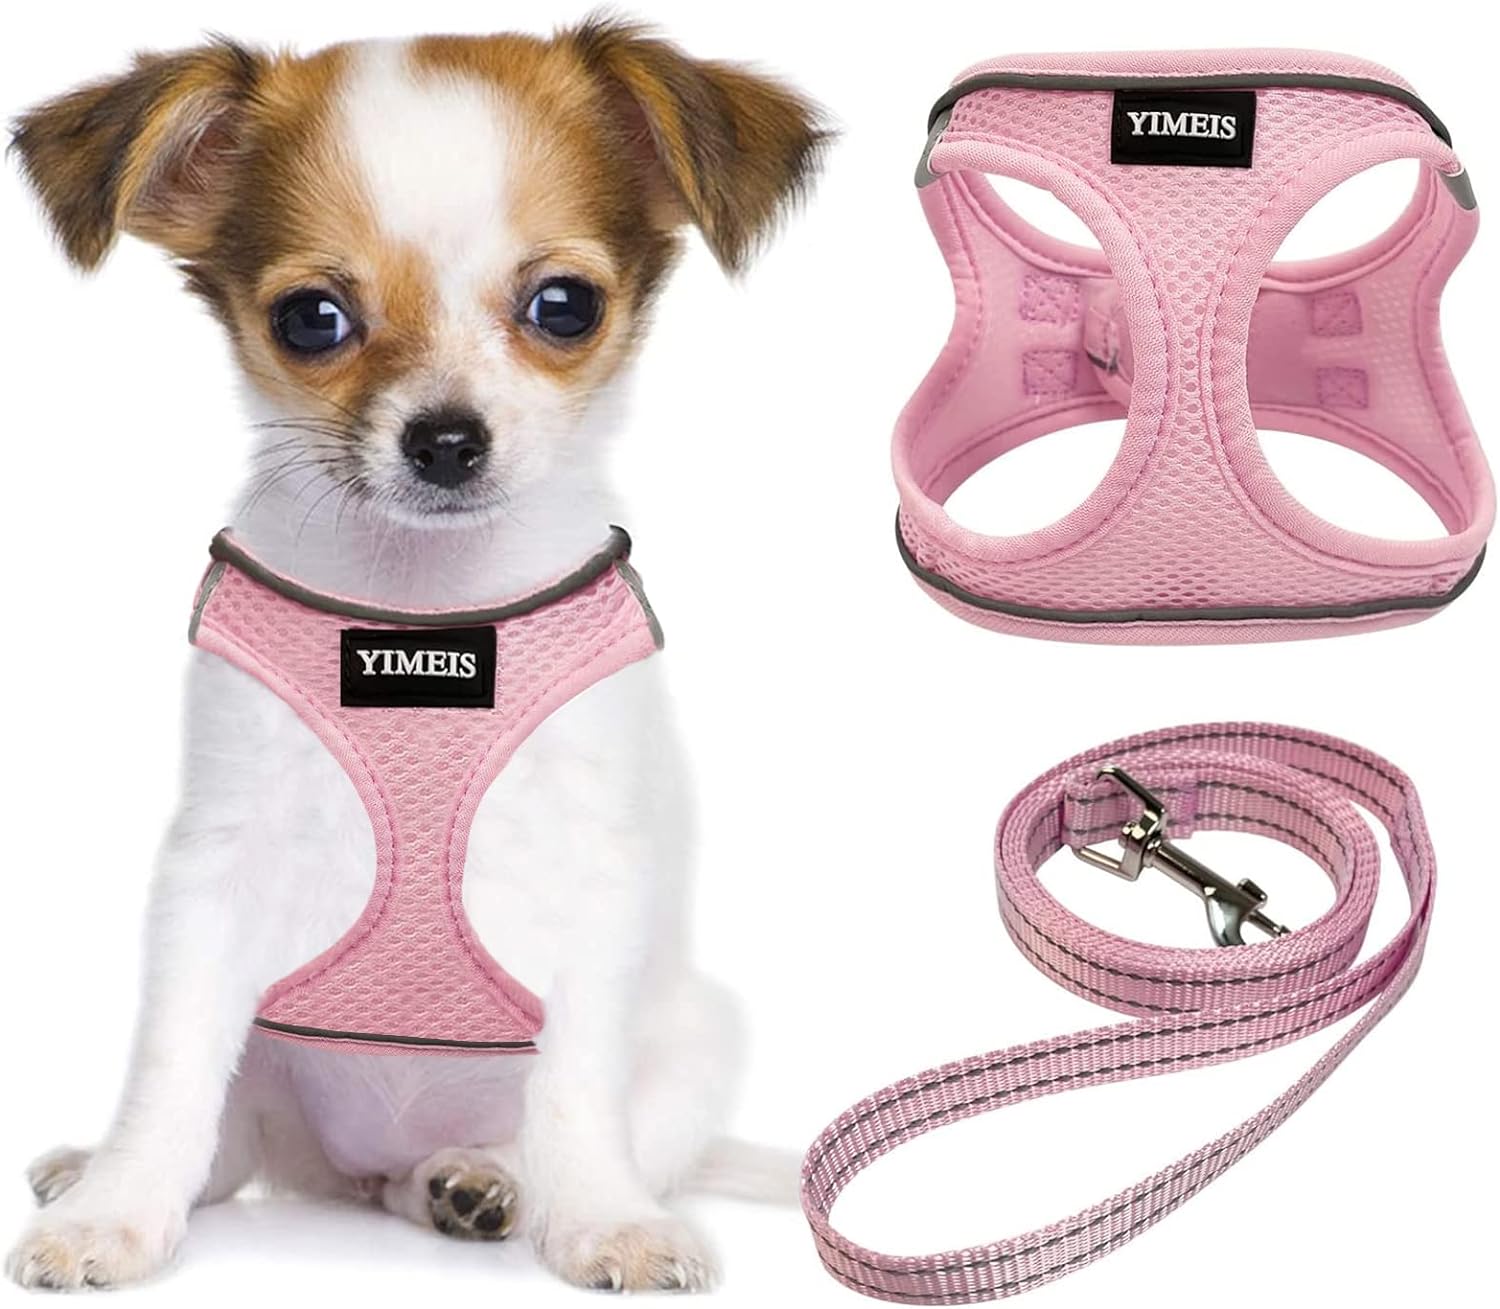 YIMEIS Dog Harness and Leash Set, No Pull Soft Mesh Pet Harness, Reflective Adjustable Puppy Vest for Small Medium Large Dogs, Cats (Pink, Medium (Pack of 1)